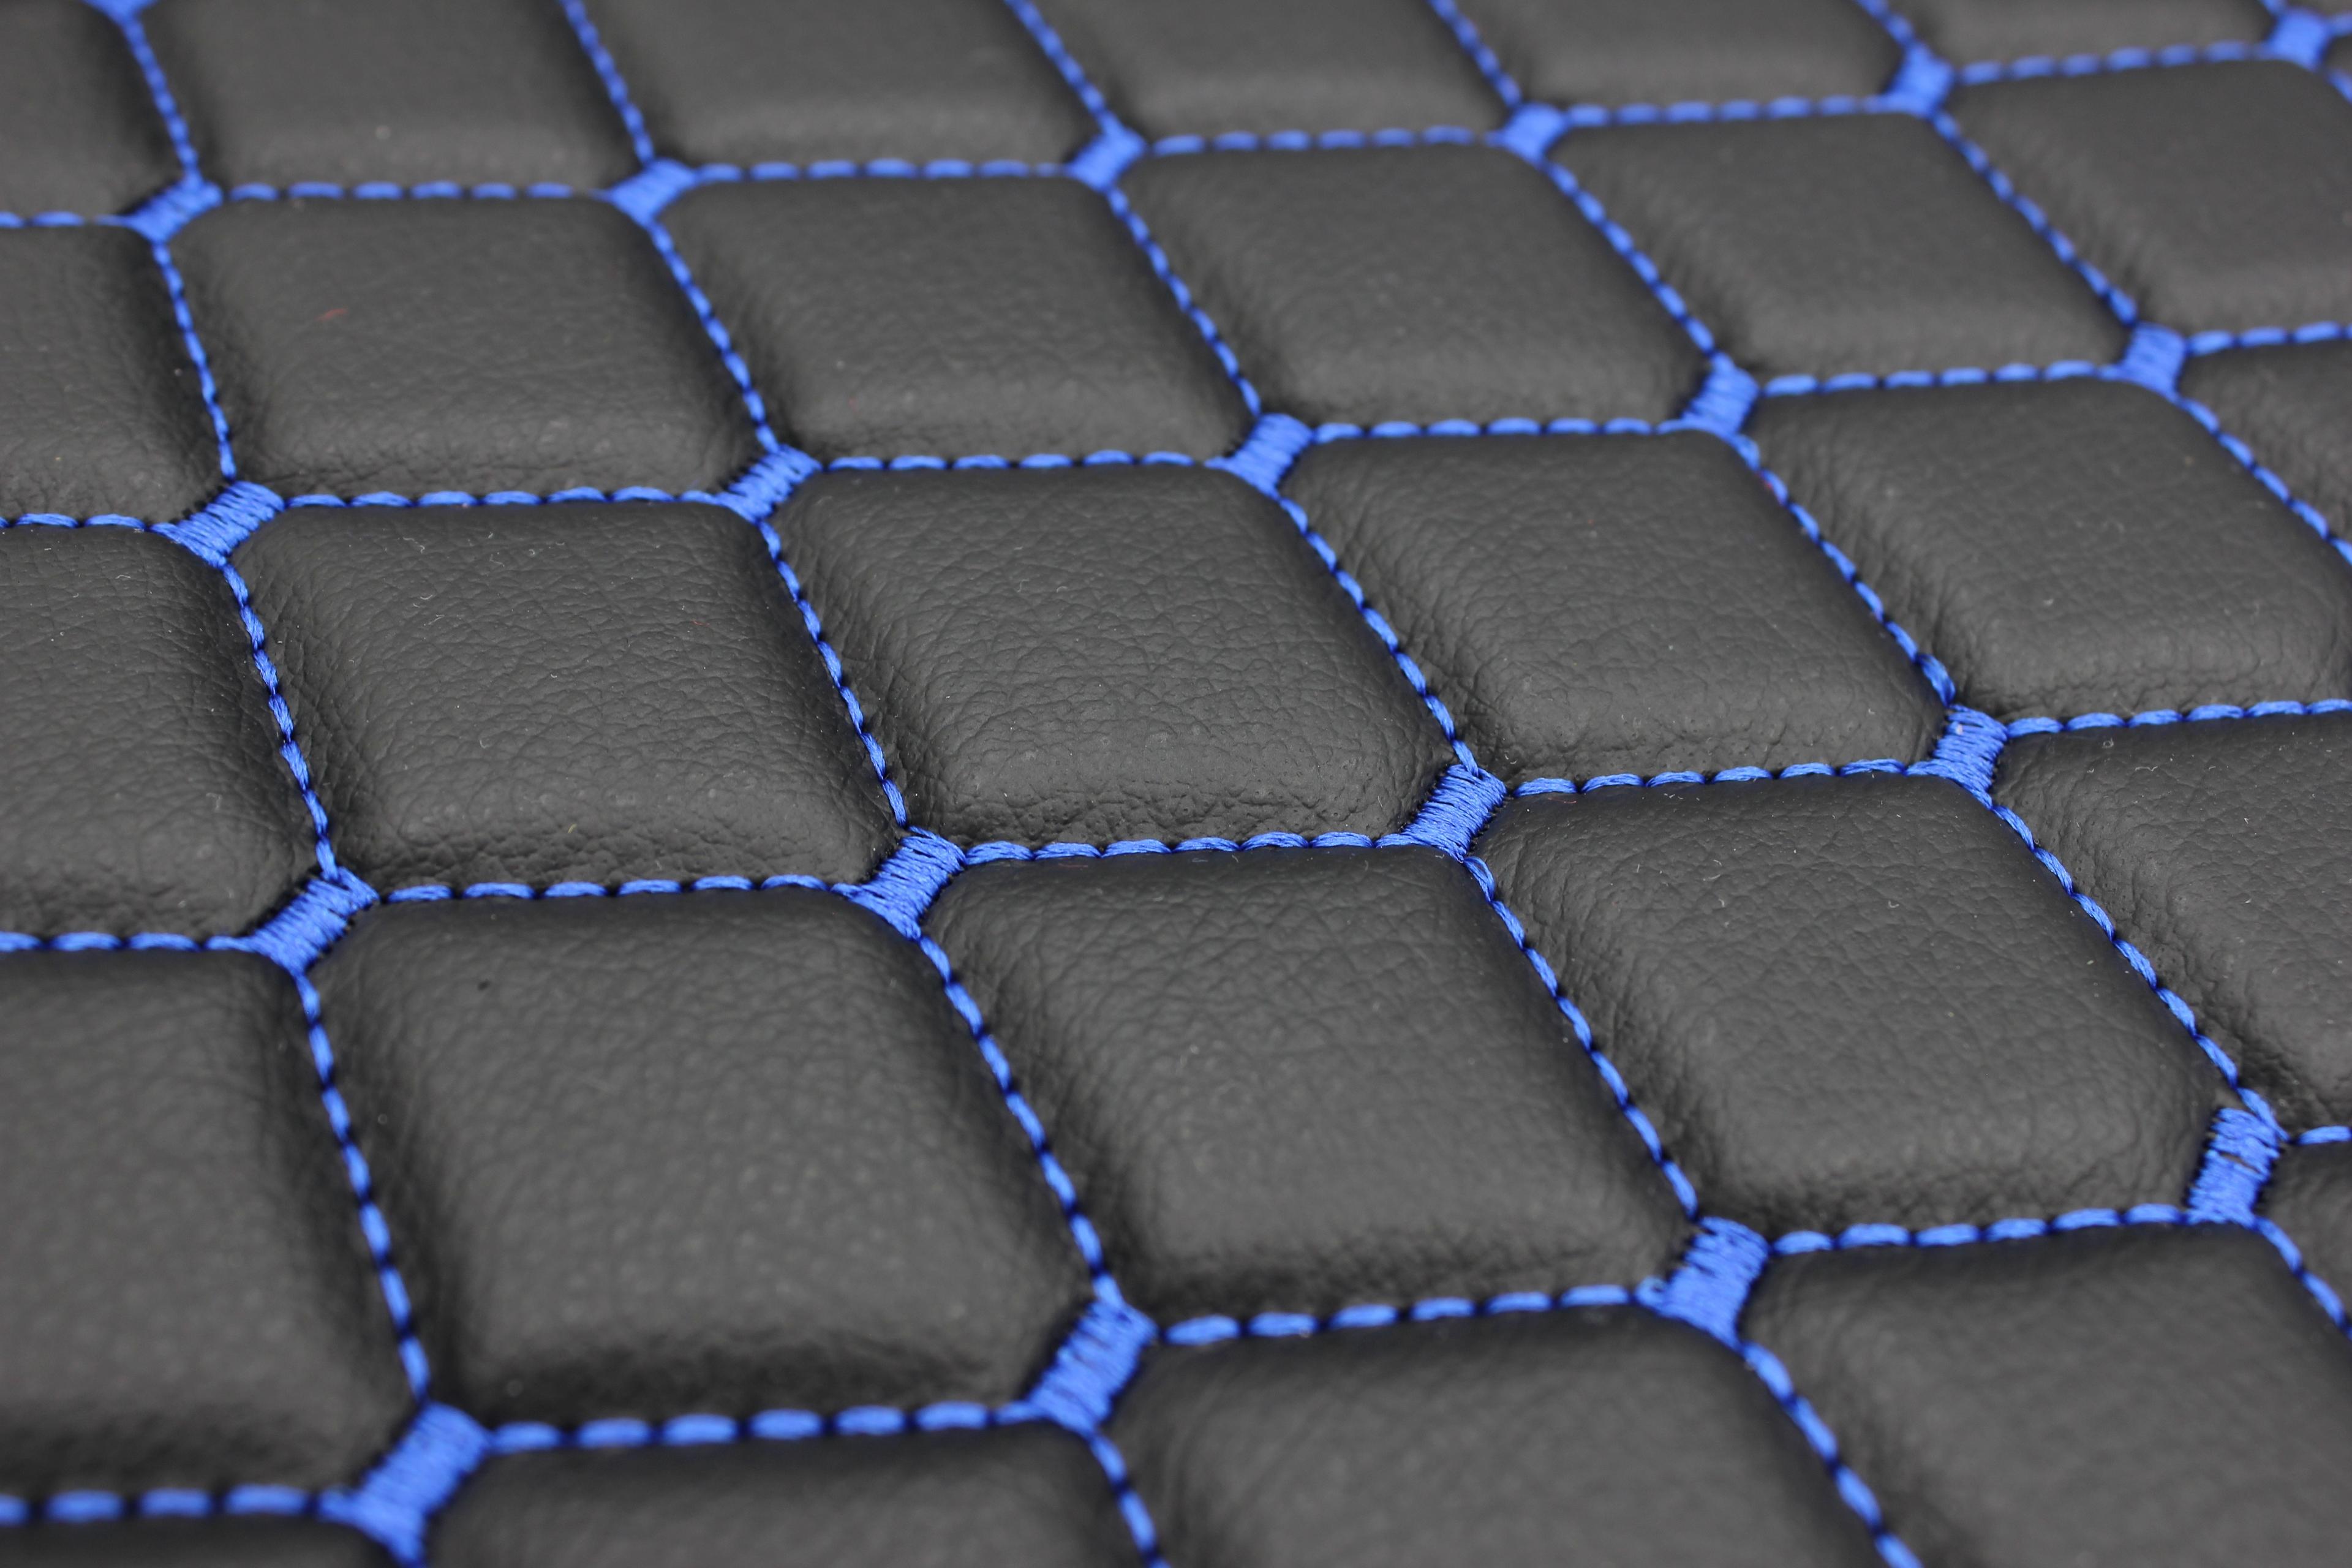 Blue Quilted Black Vinyl Faux Leather Car Upholstery Fabric | 2"x2" 5x5cm Diamond Stitch with 5mm Foam Backing | 140cm Wide | Automotive Projects